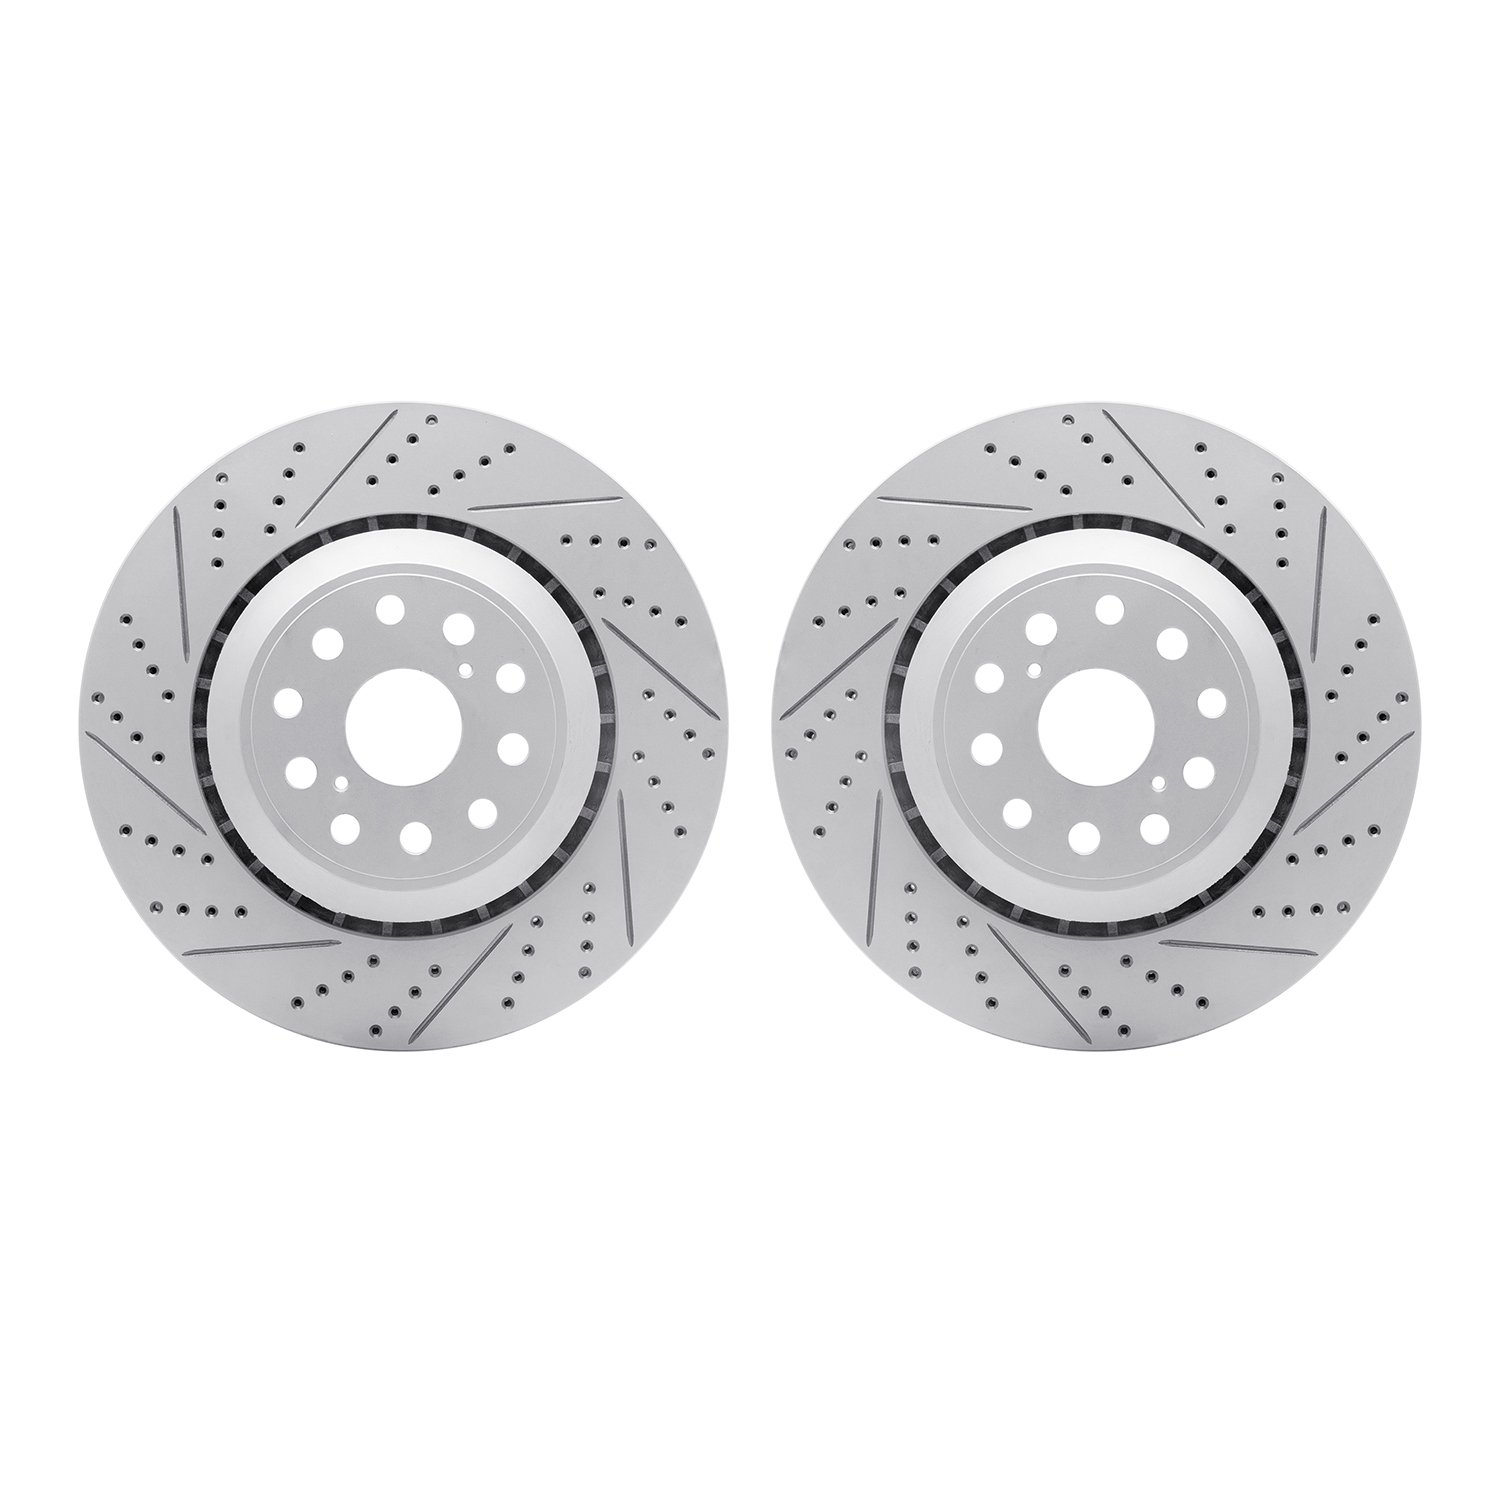 2002-75011 Geoperformance Drilled/Slotted Brake Rotors, Fits Select Lexus/Toyota/Scion, Position: Front